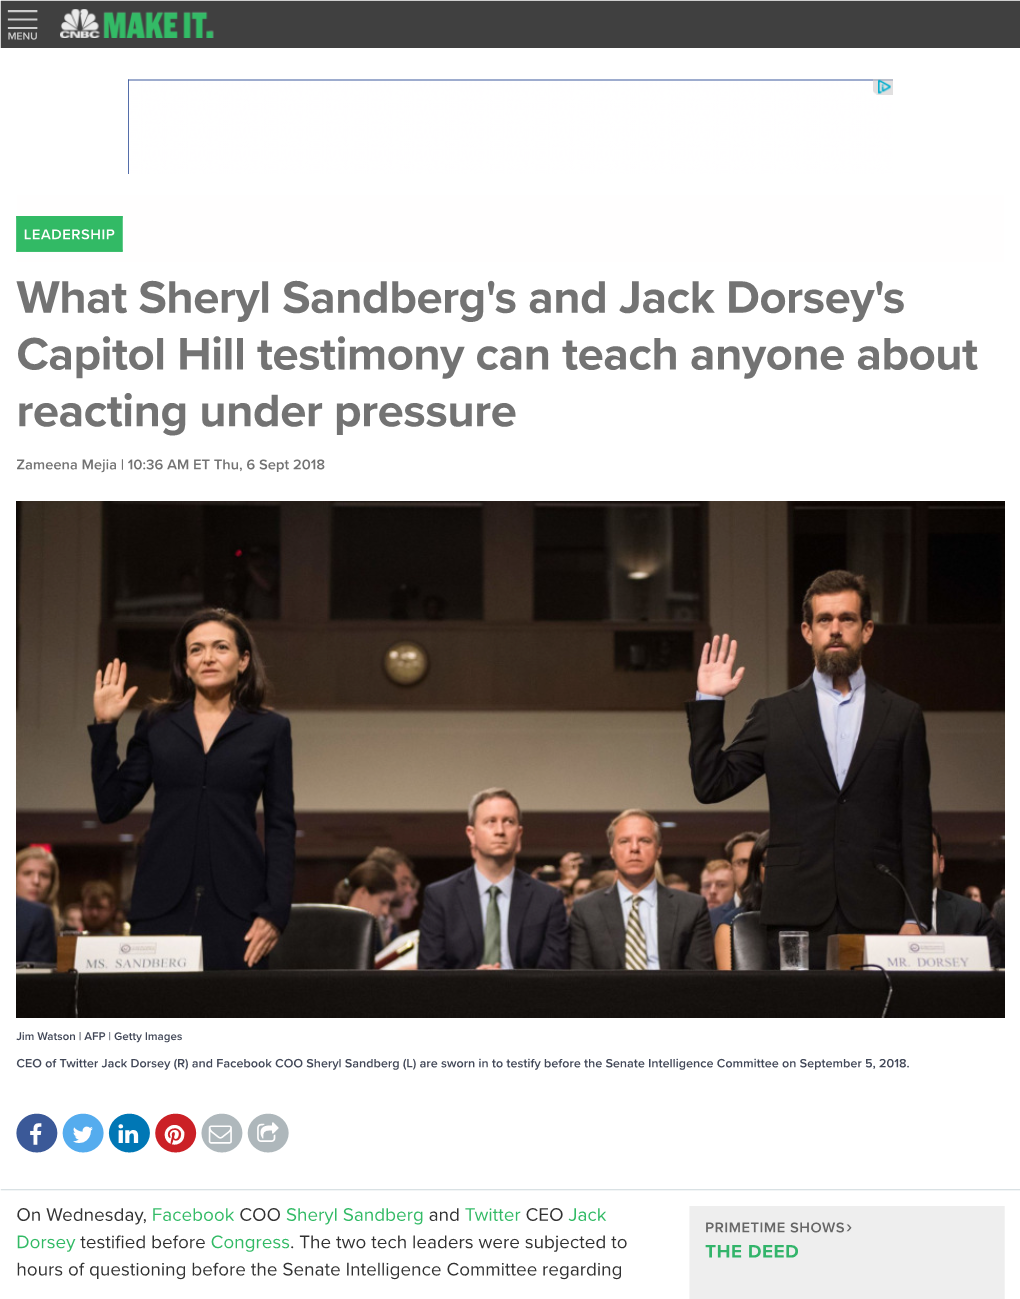 What Sheryl Sandberg's and Jack Dorsey's Capitol Hill Testimony Can Teach Anyone About Reacting Under Pressure